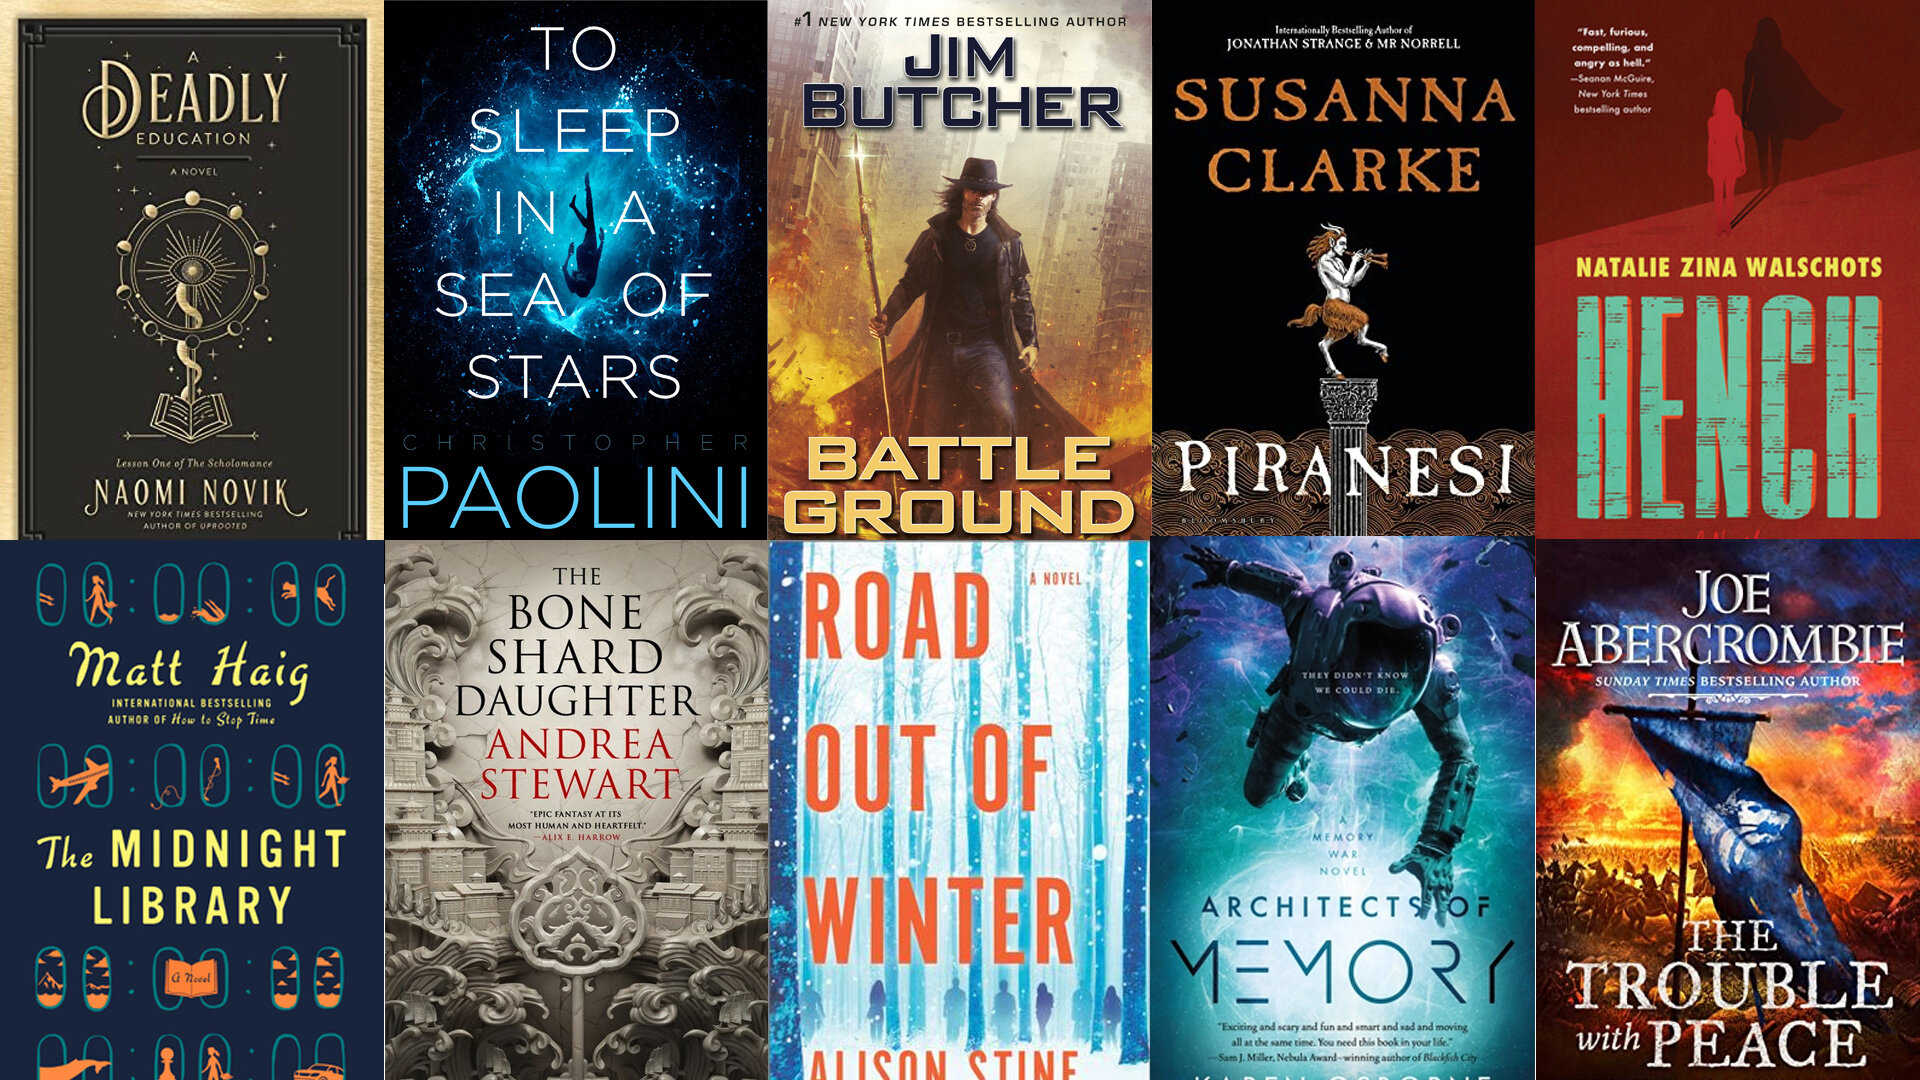 Here Are the Most Anticipated SciFi and Fantasy Books of Summer 2020